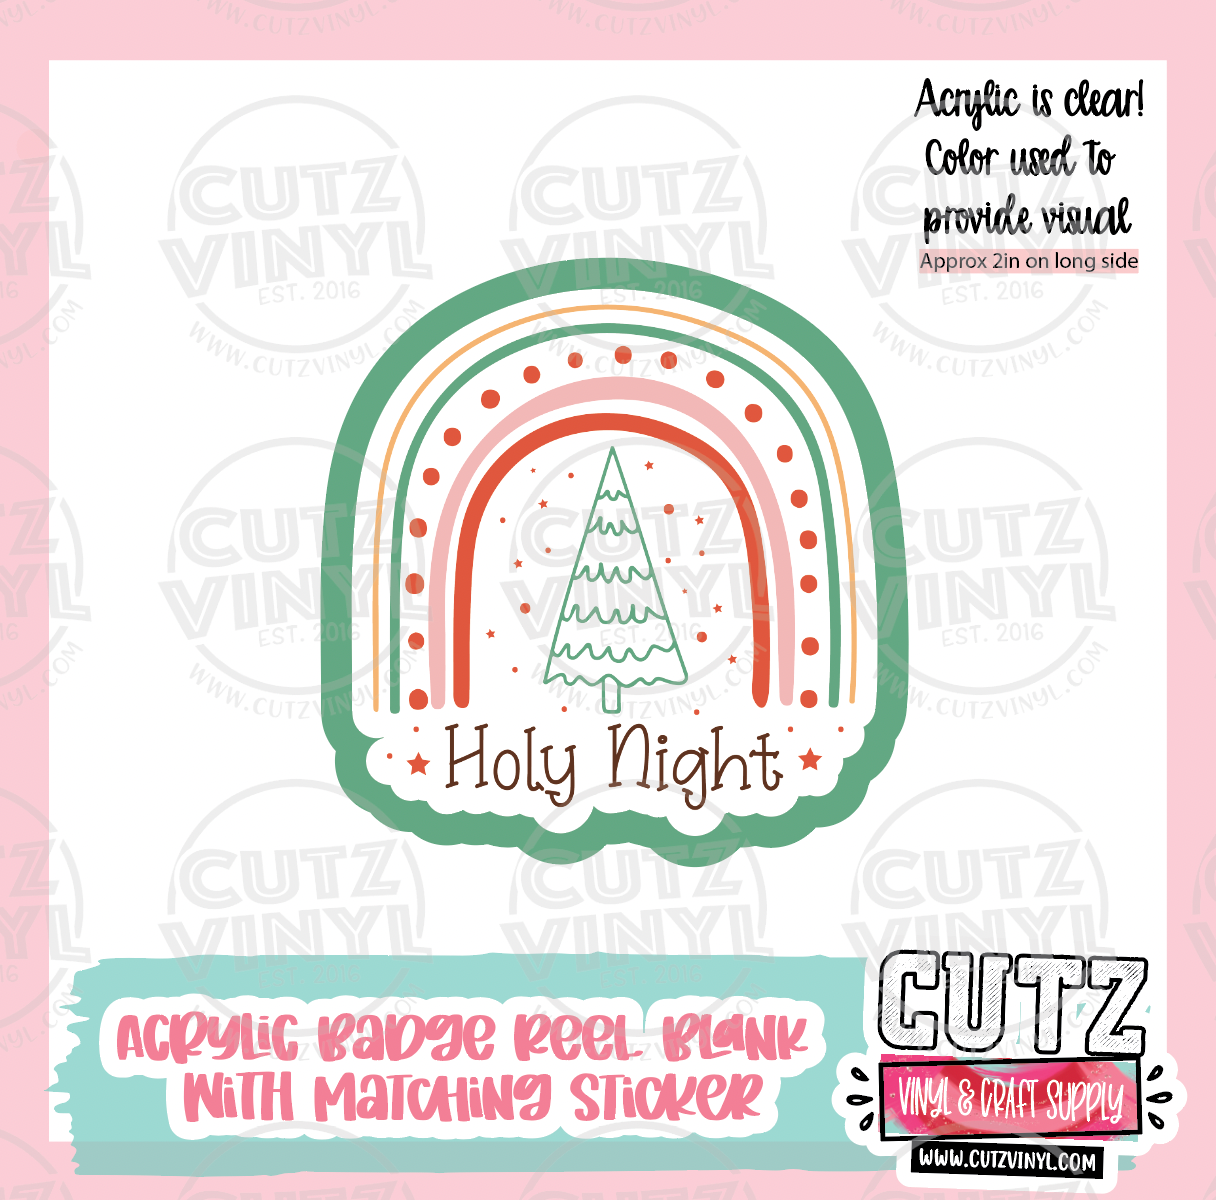 Holy Night - Acrylic Badge Reel Blank and Matching Sticker